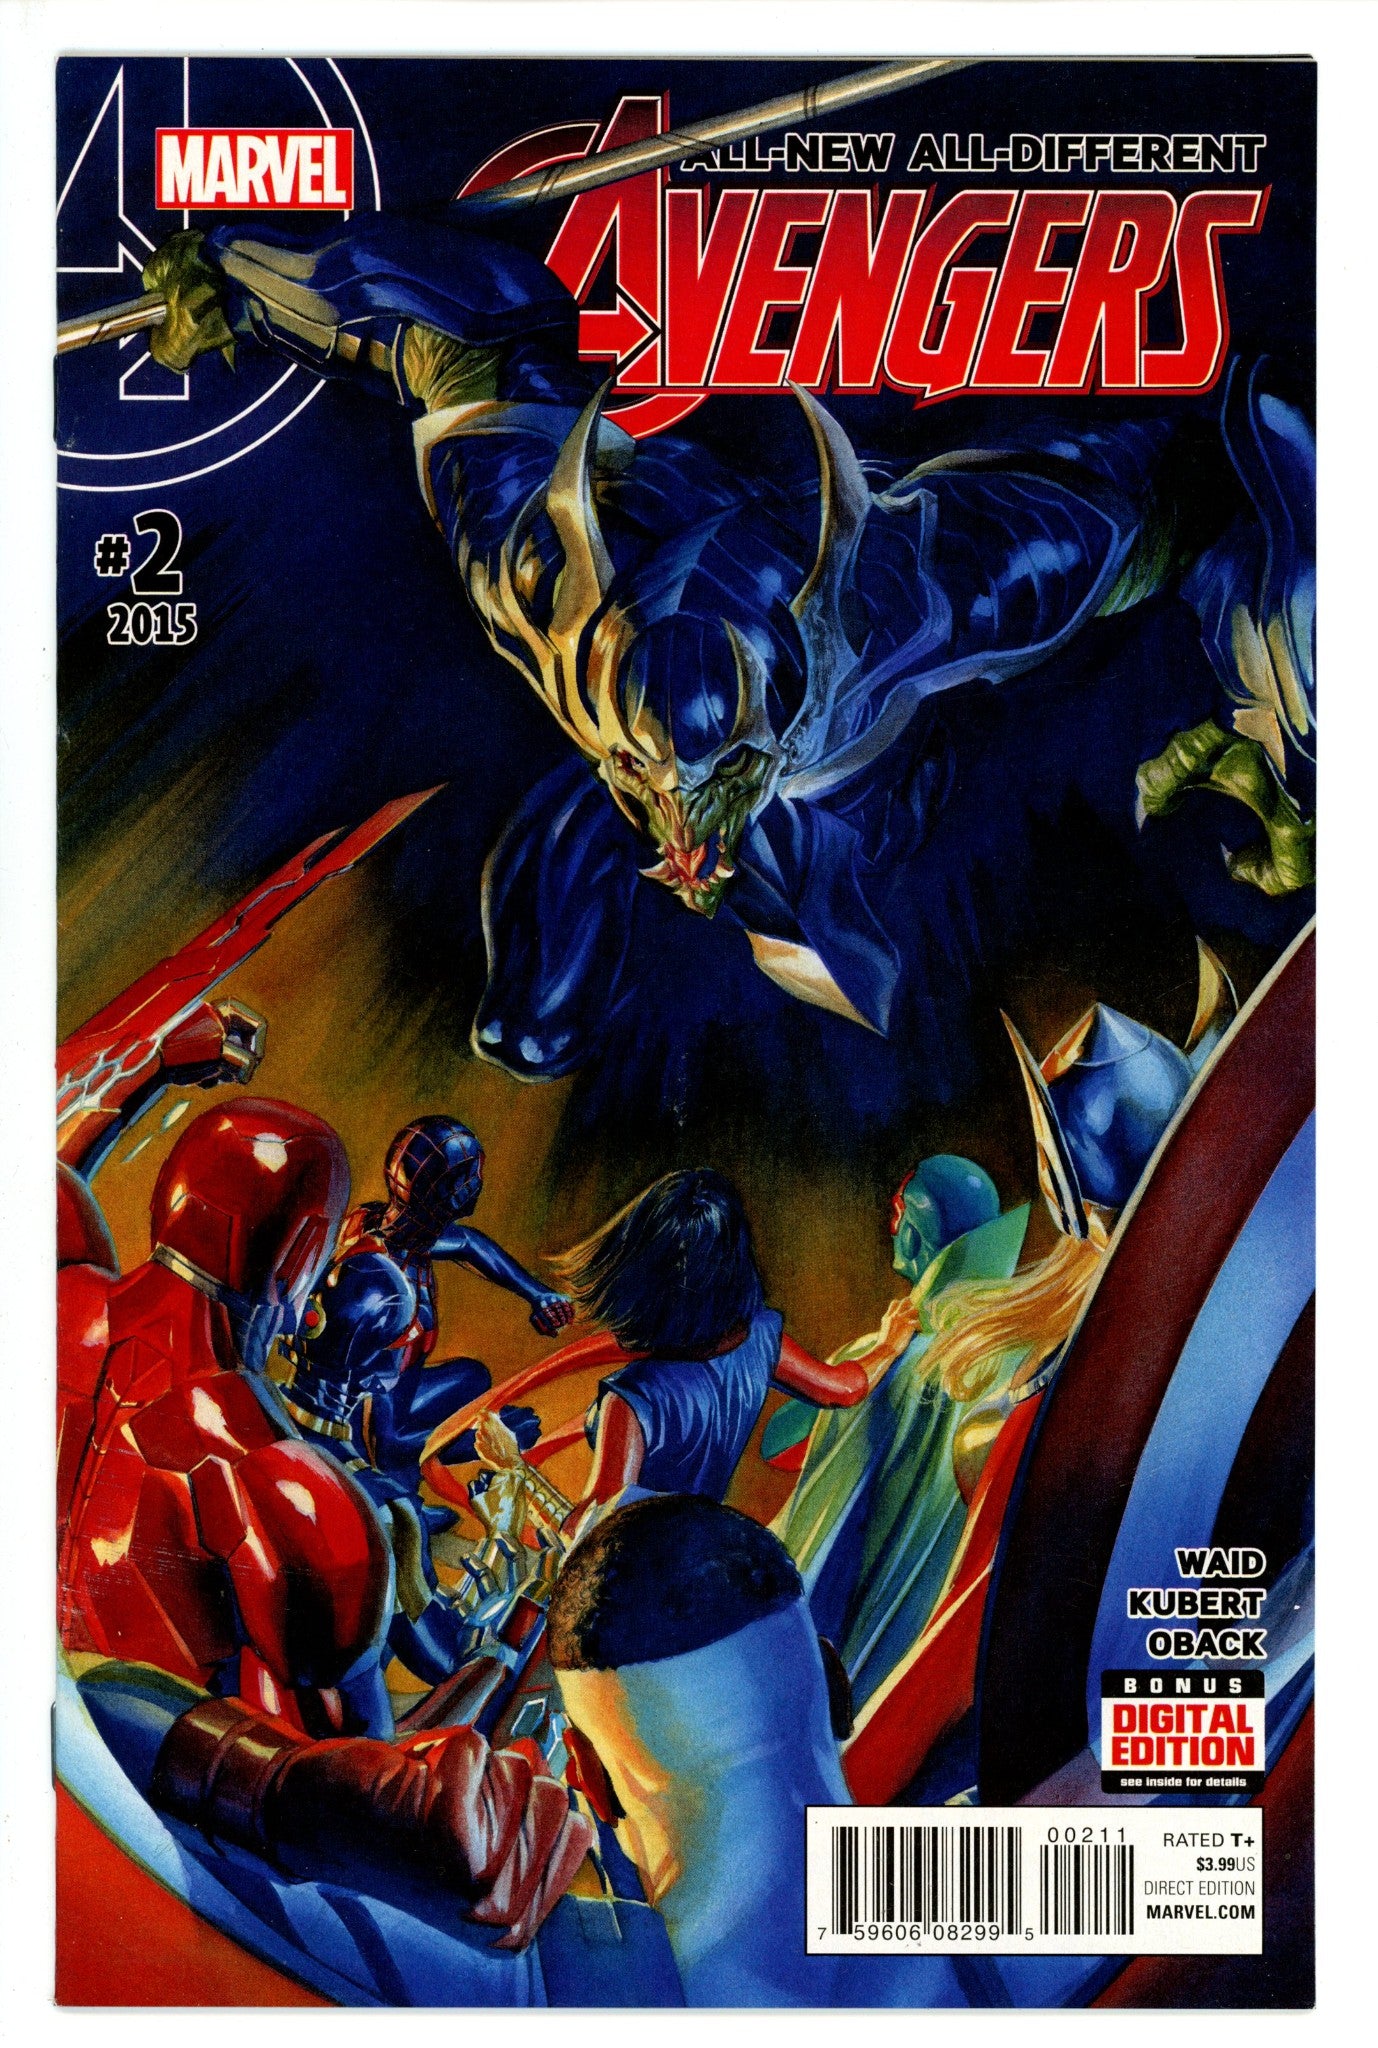 All-New, All-Different Avengers Vol 1 2 (2015)